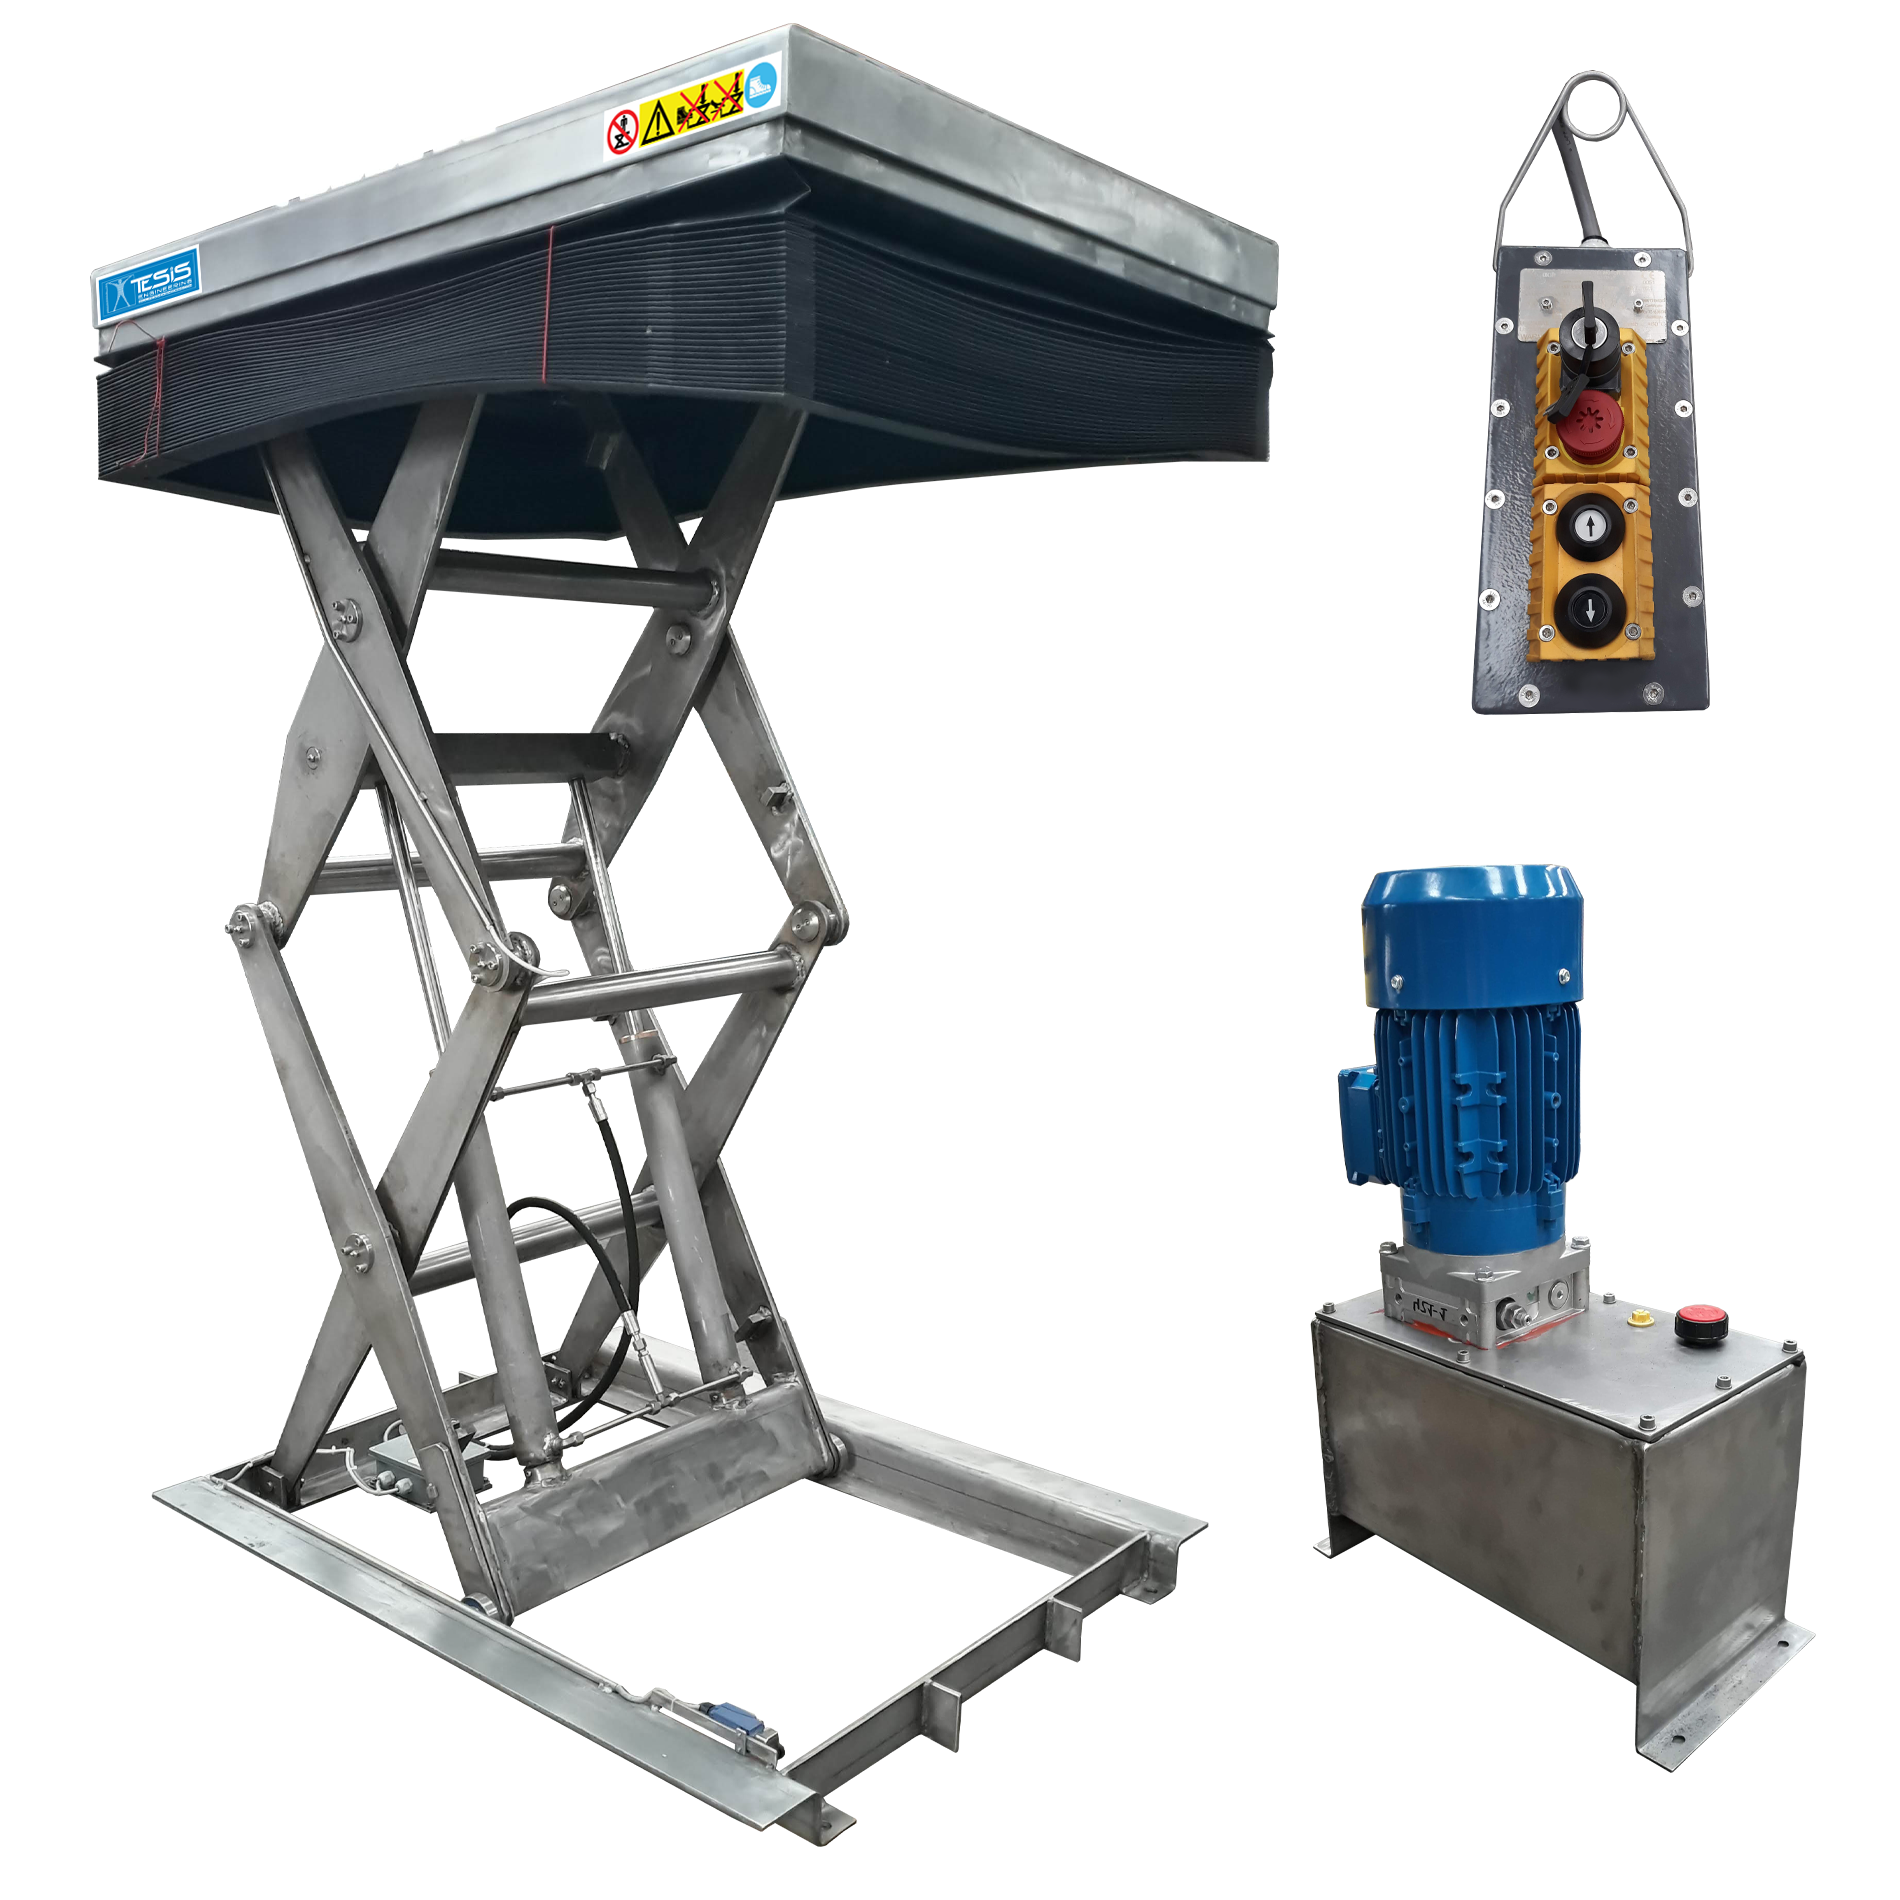 Stainless steel lift tables, double  scissor lifts, lift table with bellow guarding and ATEX pushbutton panel, platform lifts for special environments, stainless steel platform lifts, lift tables with bellow skirting